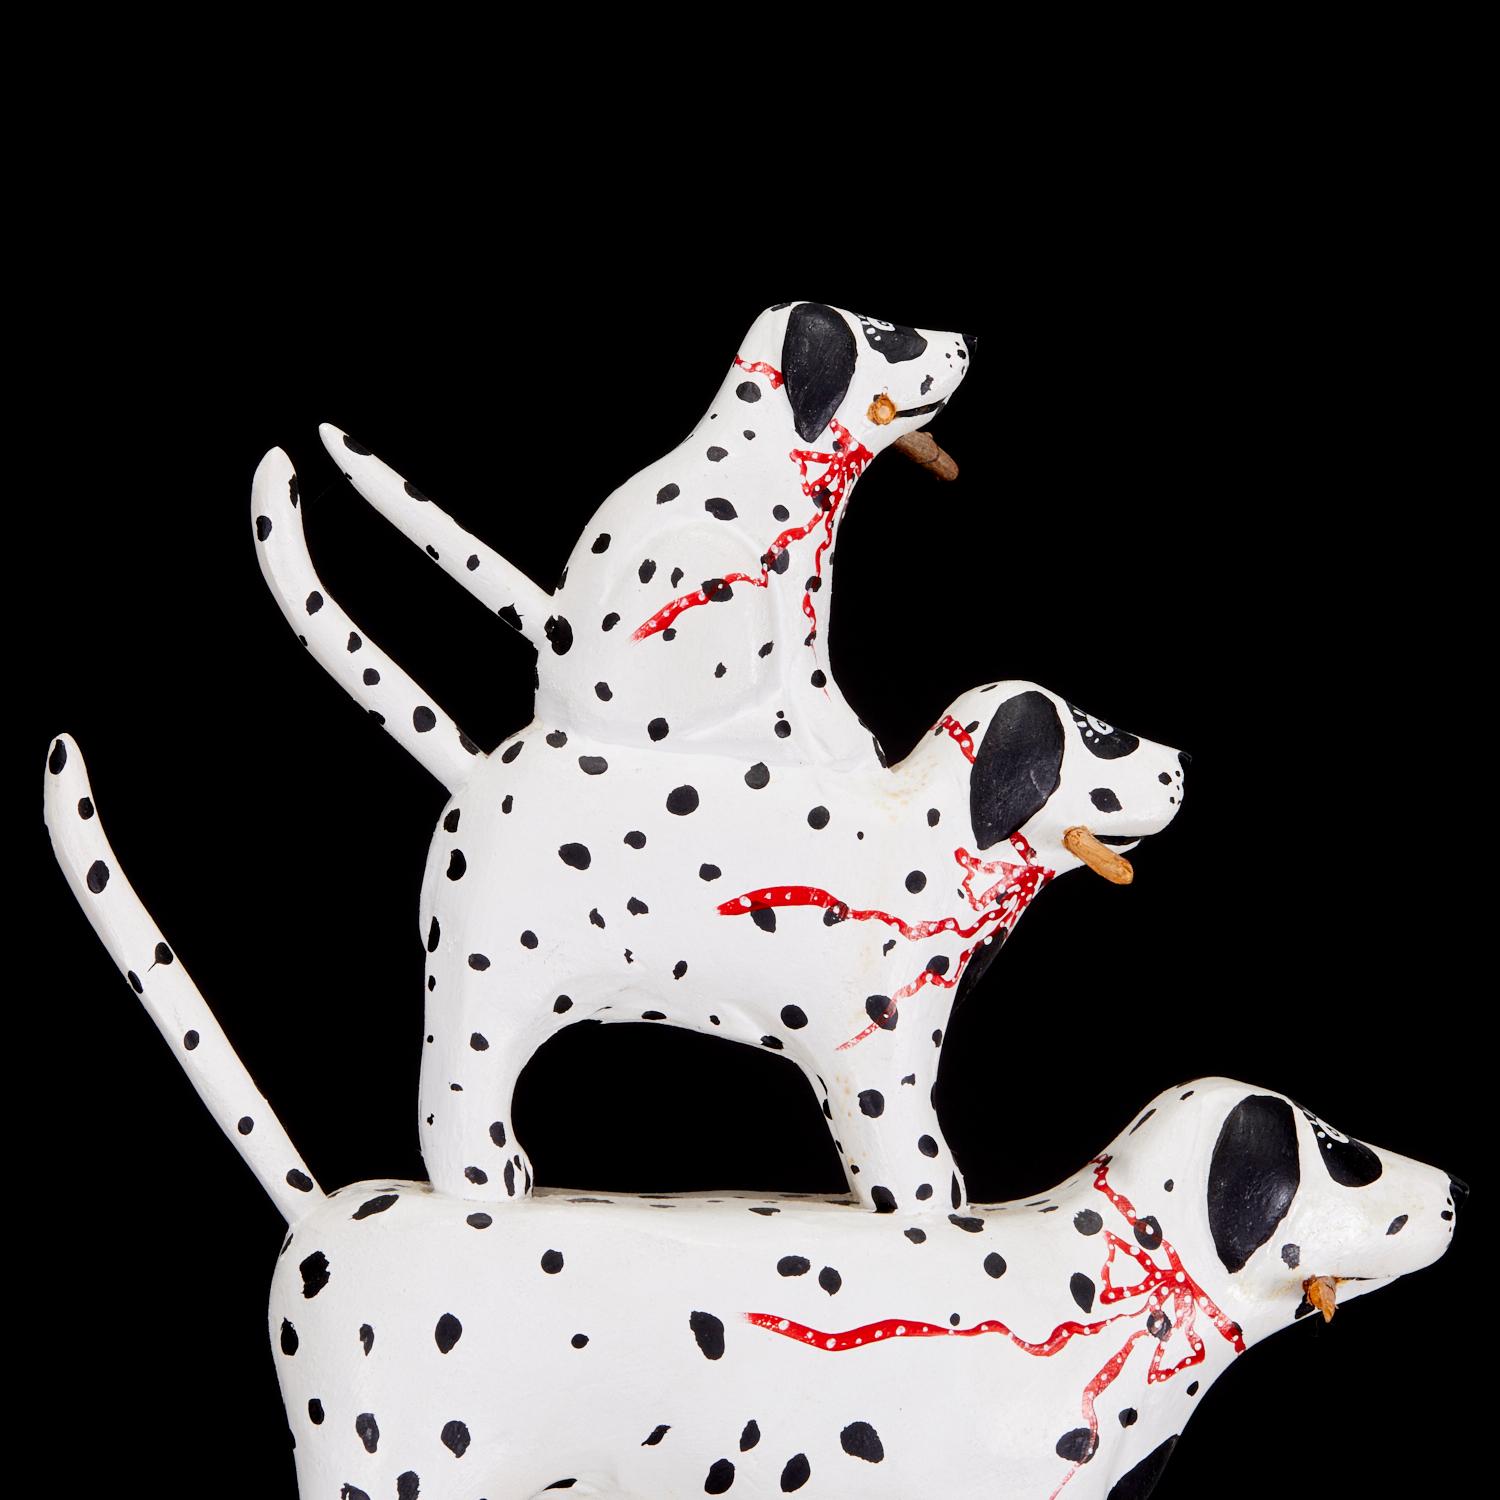 c. 1988, Bruce Murphy (American) a carved and painted wood sculpture of five dalmations of graduated sizes standing on each other's backs, signed on seated dog's paw. Each dog sports a red ribbon with white polka dots and is holding a stick in their